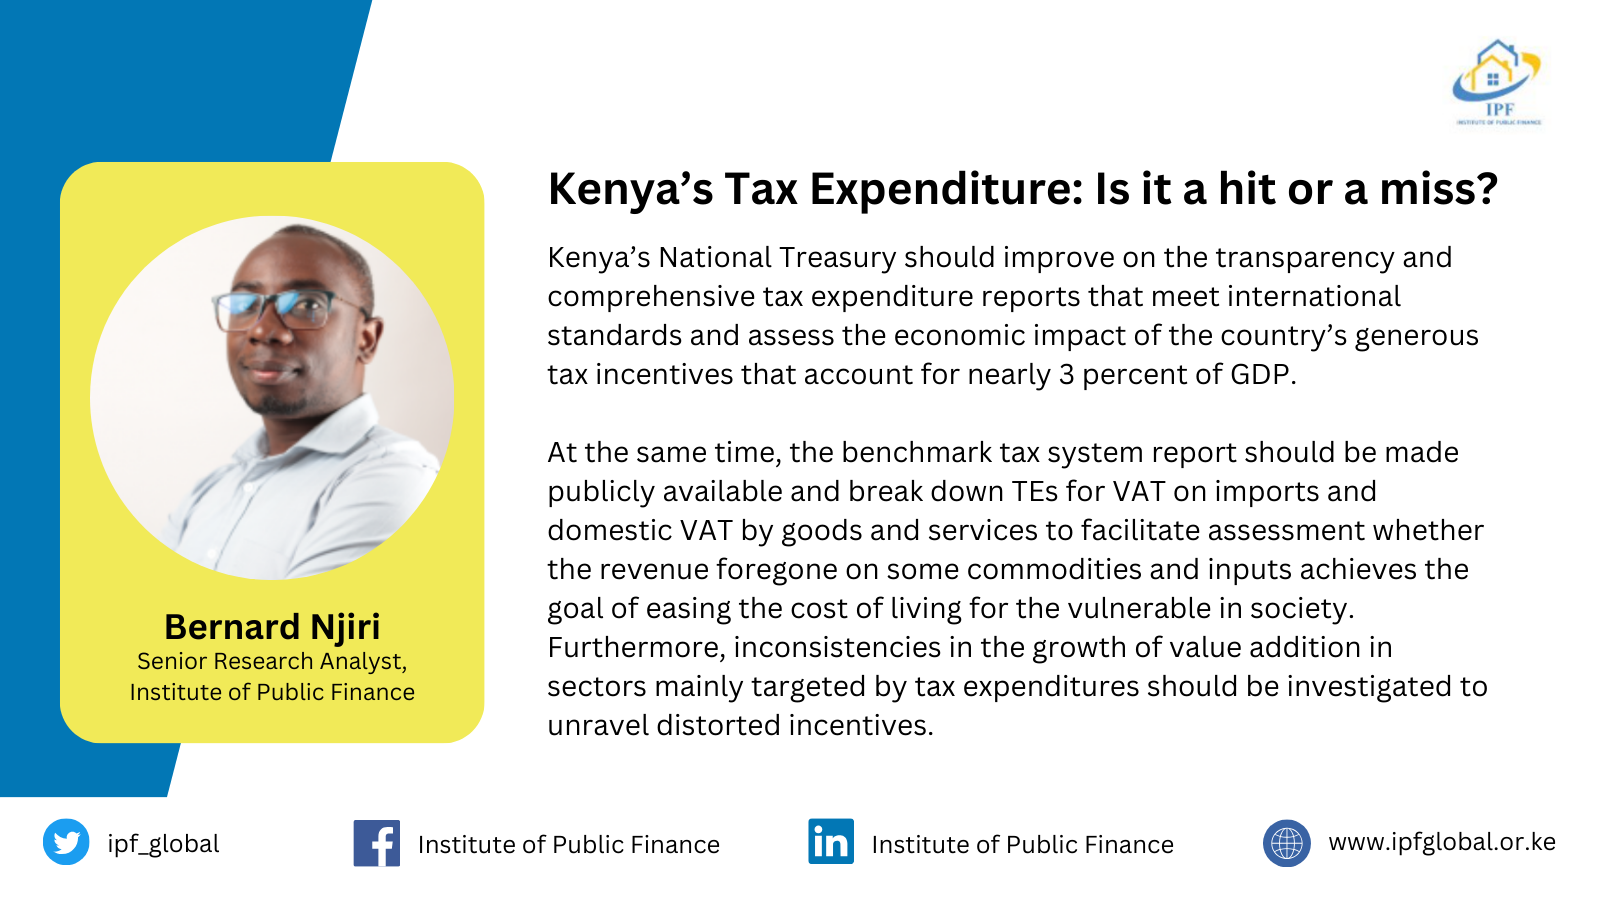 Kenya’s Tax Expenditure: Is it a hit or a miss?